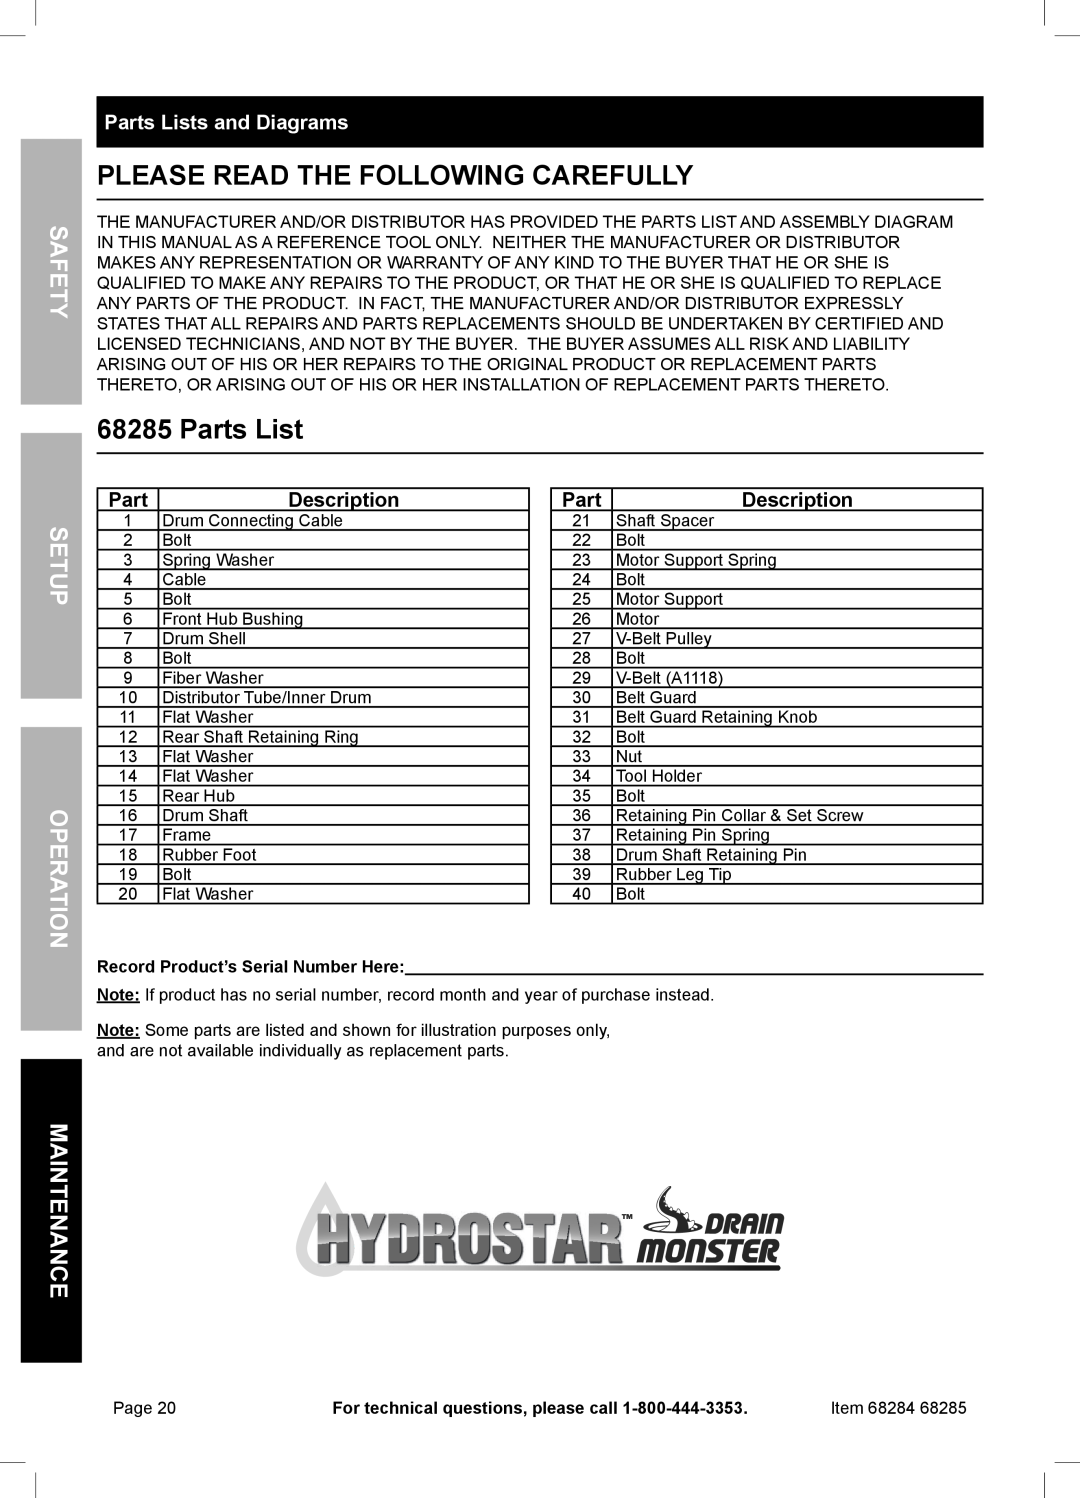 Harbor Freight Tools 68285 Please Read The Following Carefully, Parts Lists and Diagrams, PartDescription, Safety 